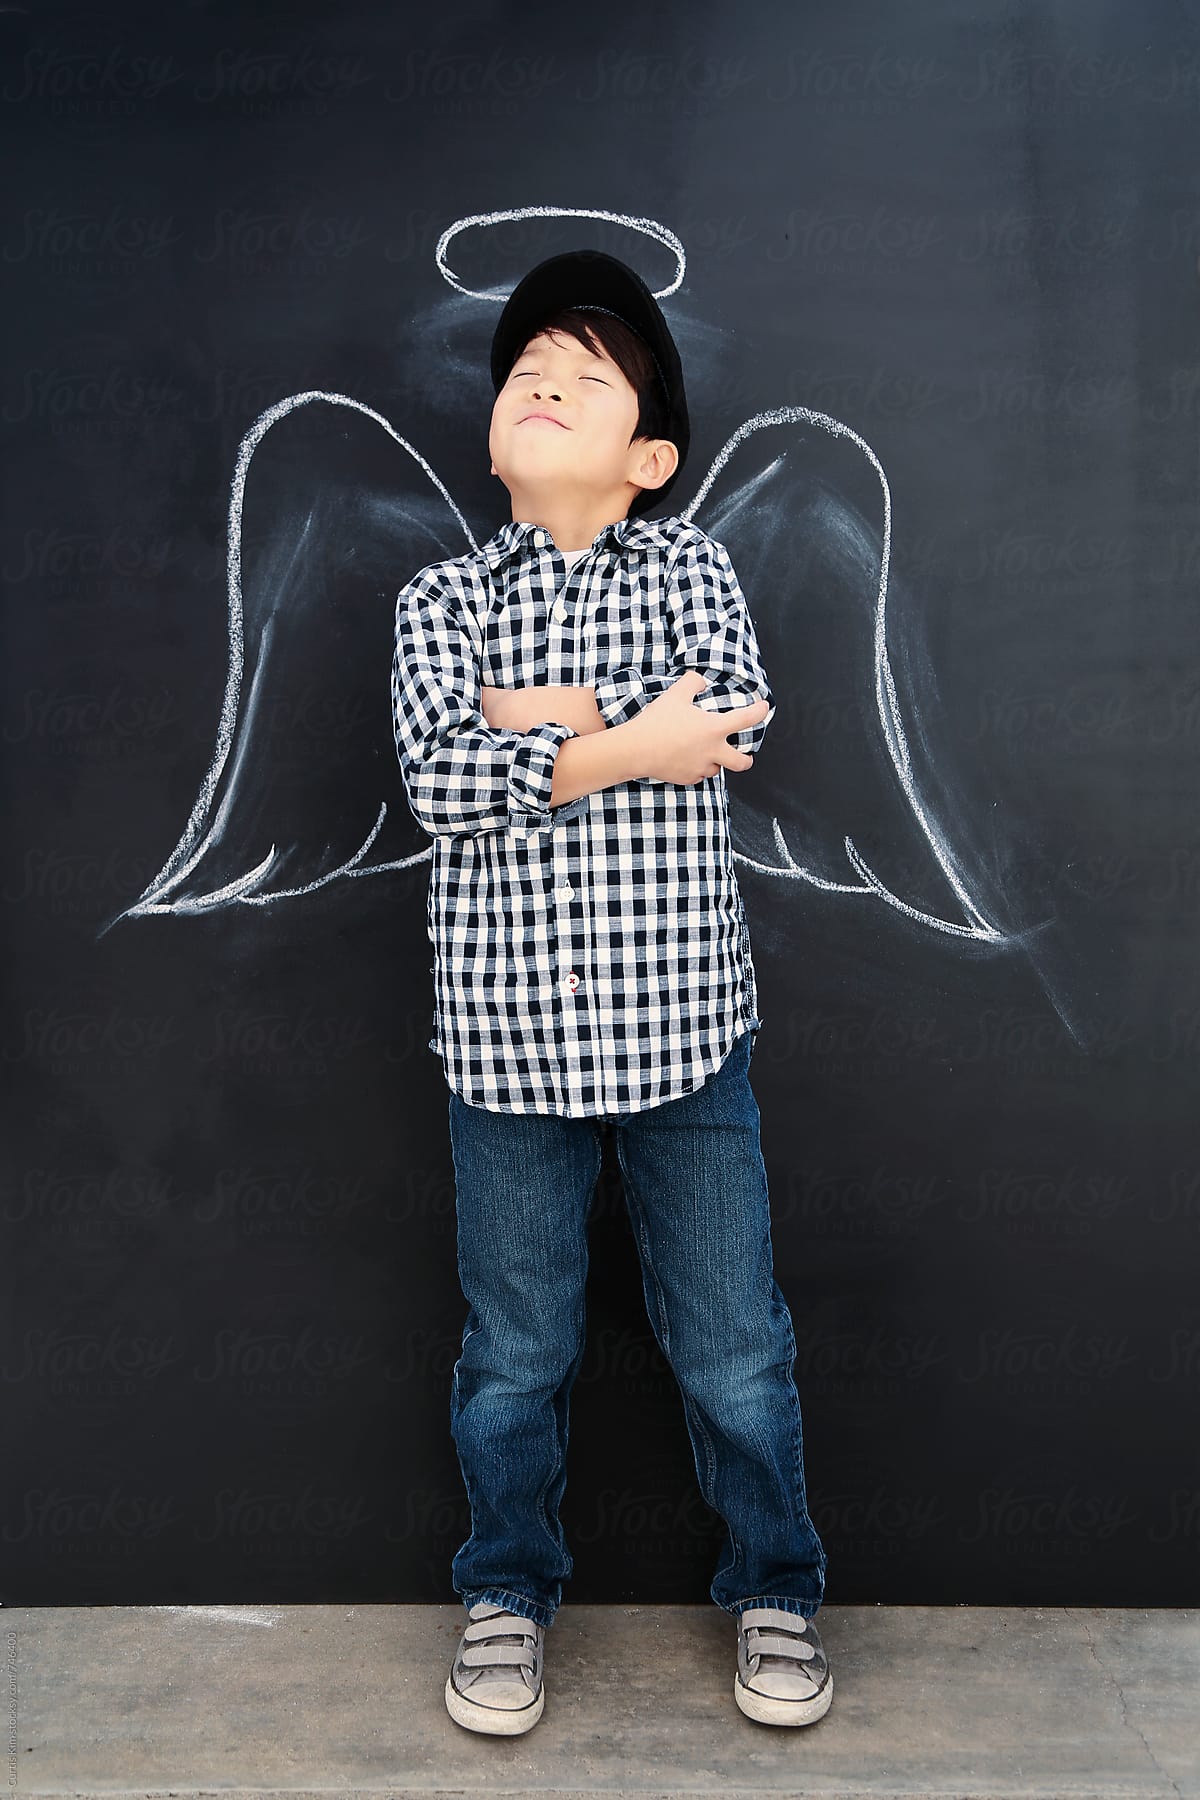 Handsome kid with angel wings and halo around his head